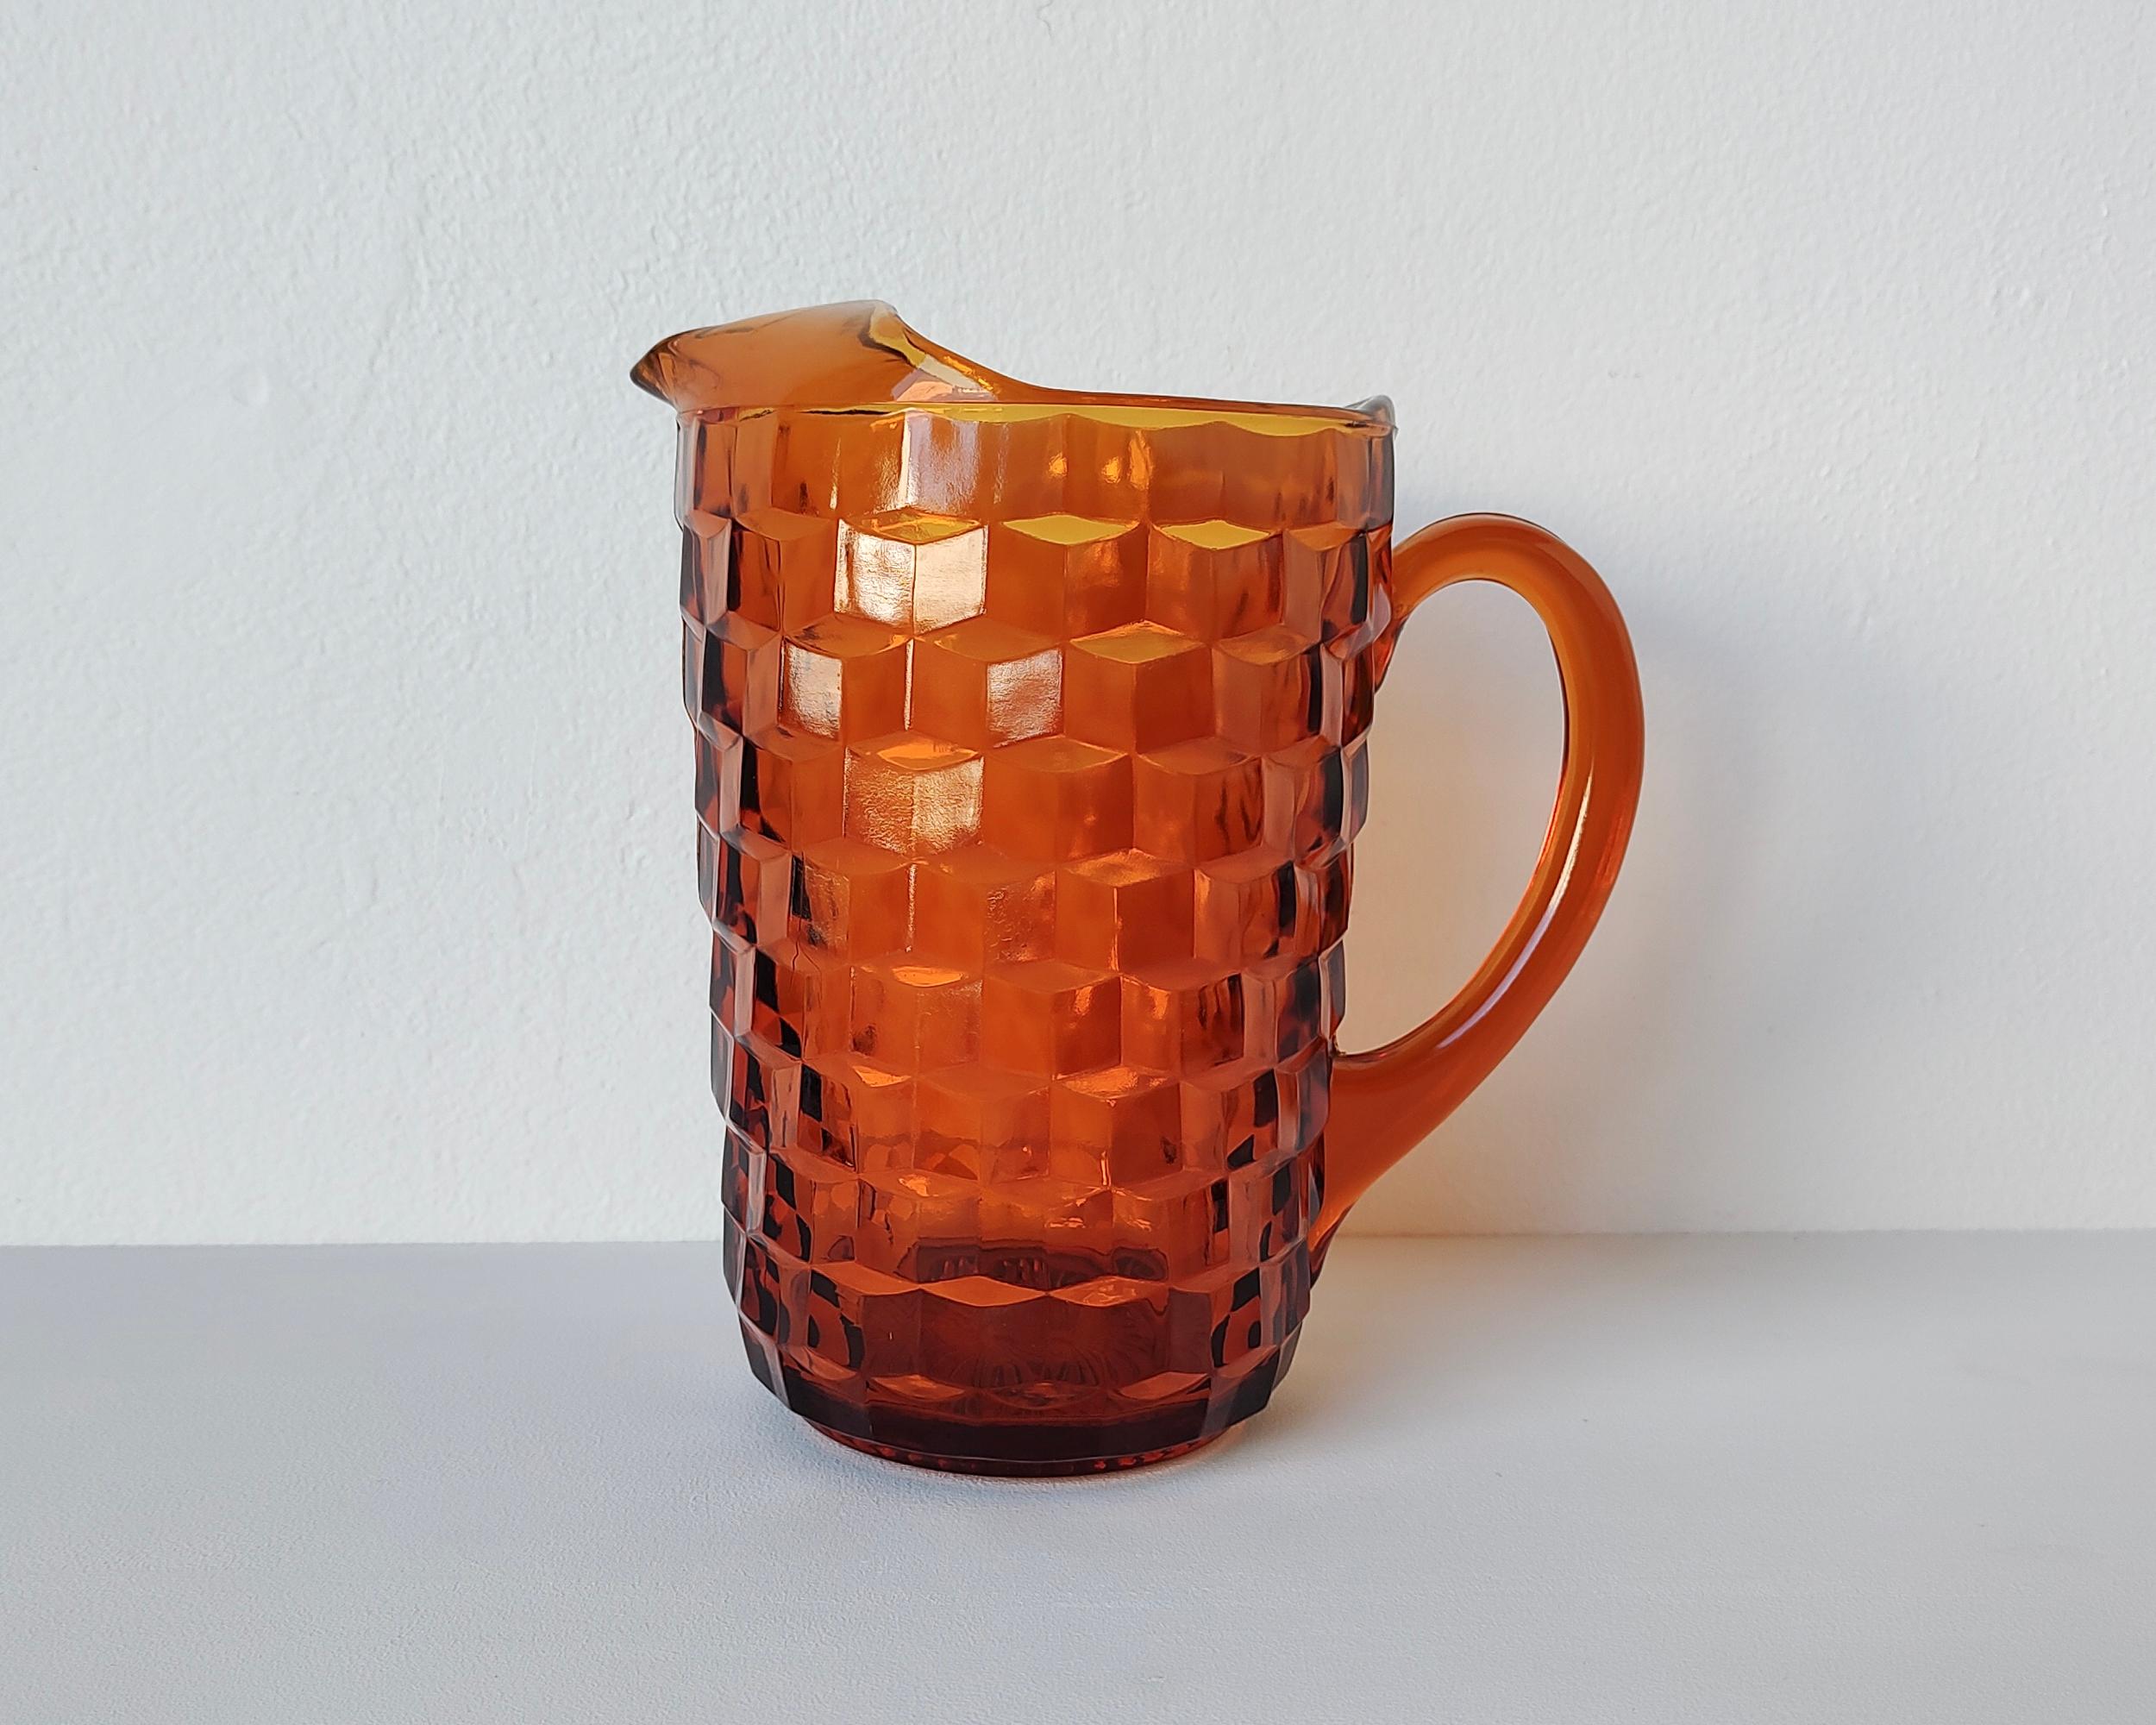 Beautiful vintage thick glass pitcher. Deep orange-umber color with textured geometric design. No chips or cracks.

5.25